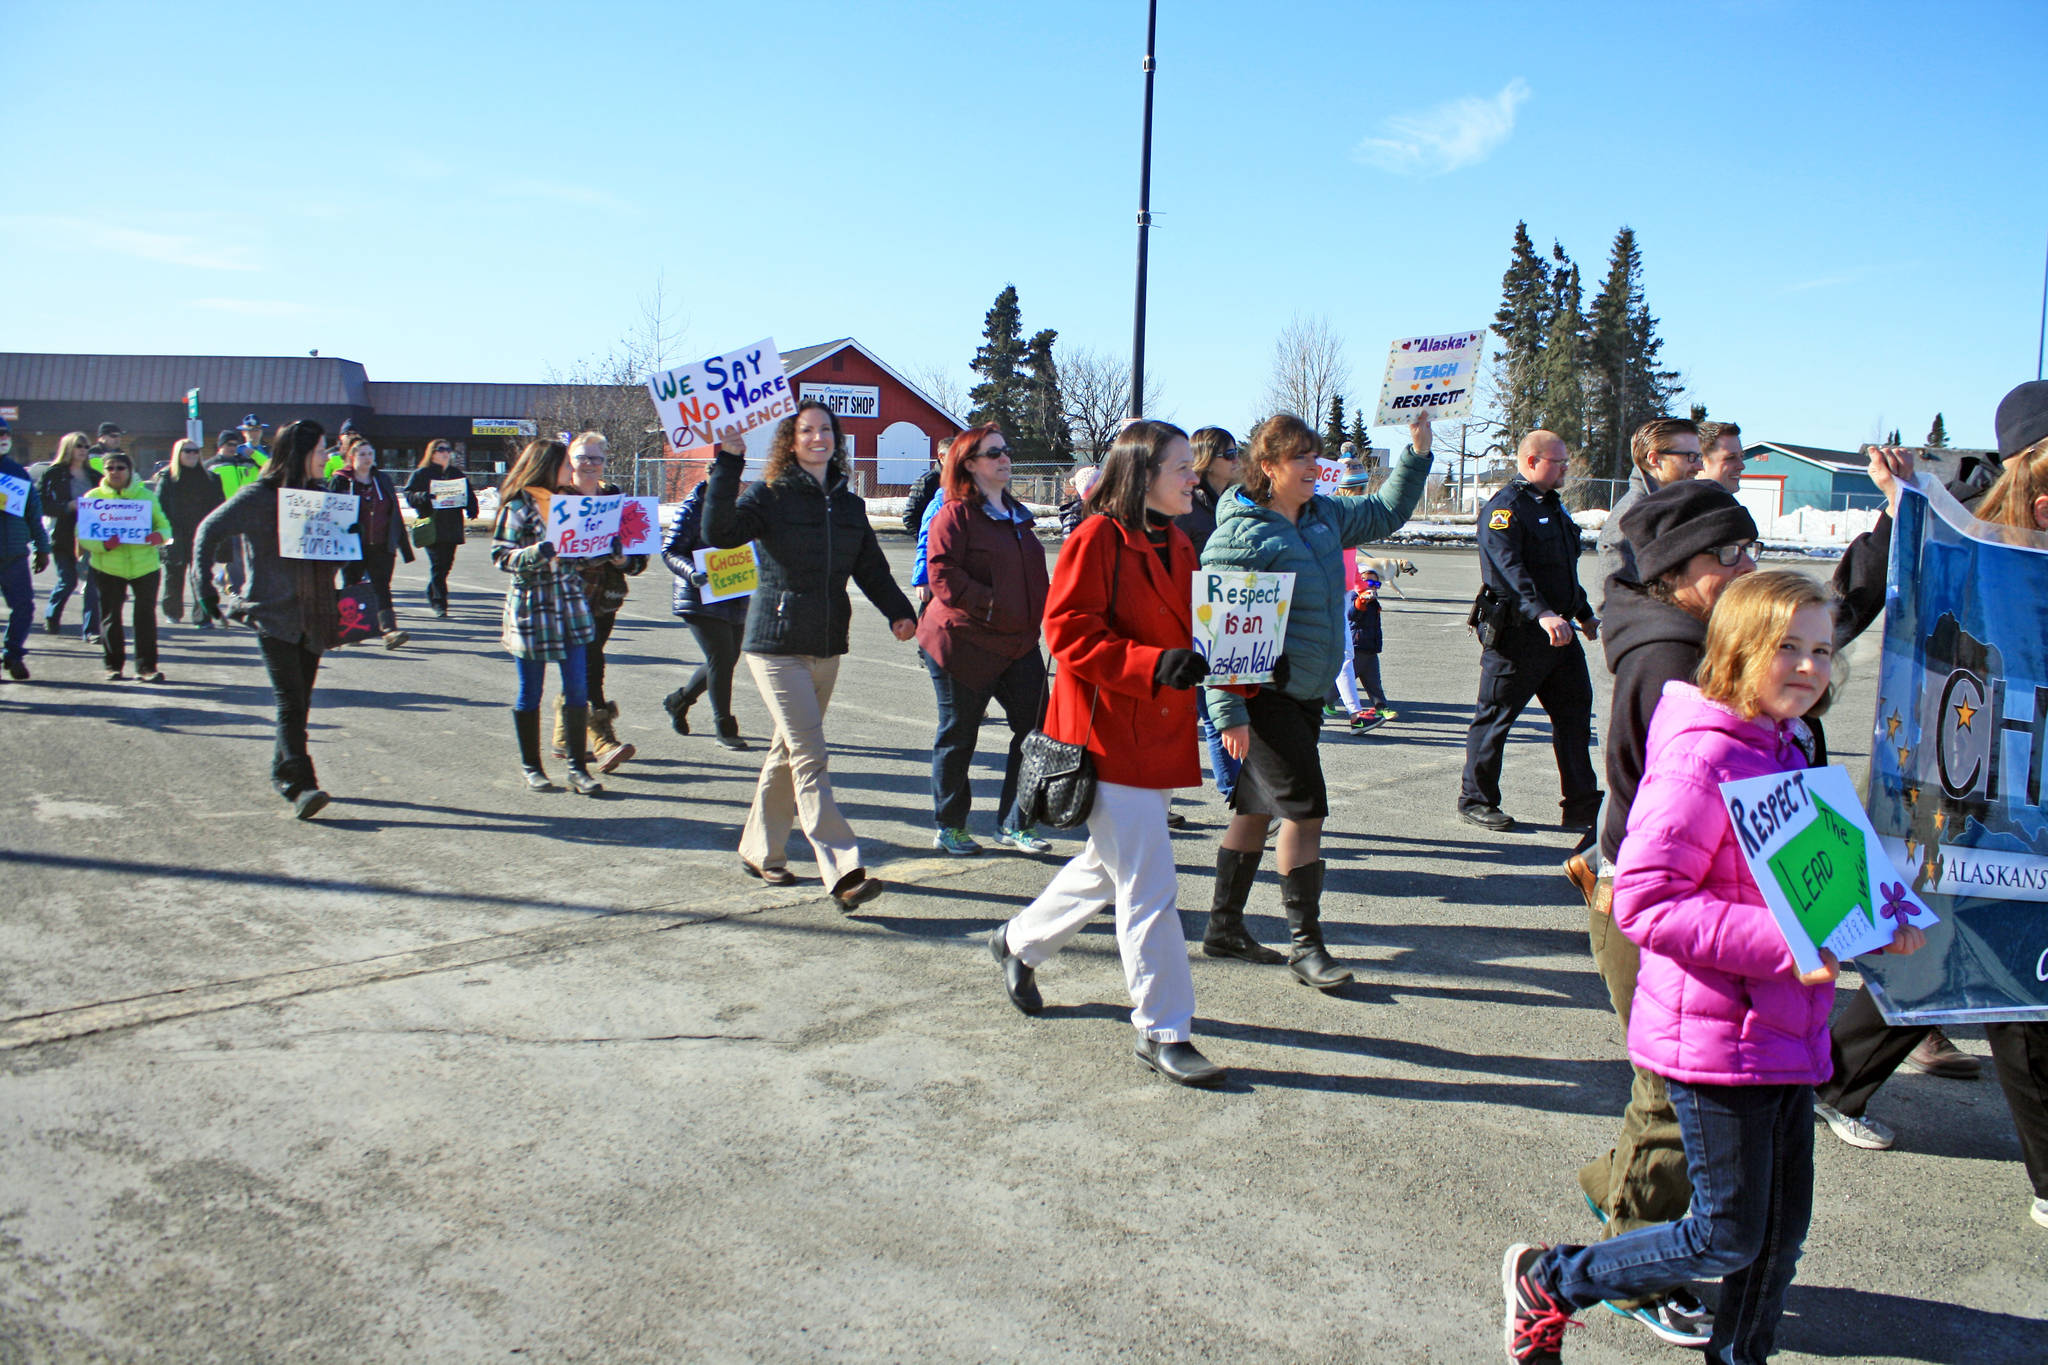 Marchers arrive at the Kenai Visitor and Cultural Center during the Alaskans Choose Respect Awareness Event, hosted by the LeeShore Center, on Wednesday, March 28 in Kenai. The march aimed to draw attention to the issue of sexual assault and domestic violence. (Photo by Erin Thompson/Peninsula Clarion)